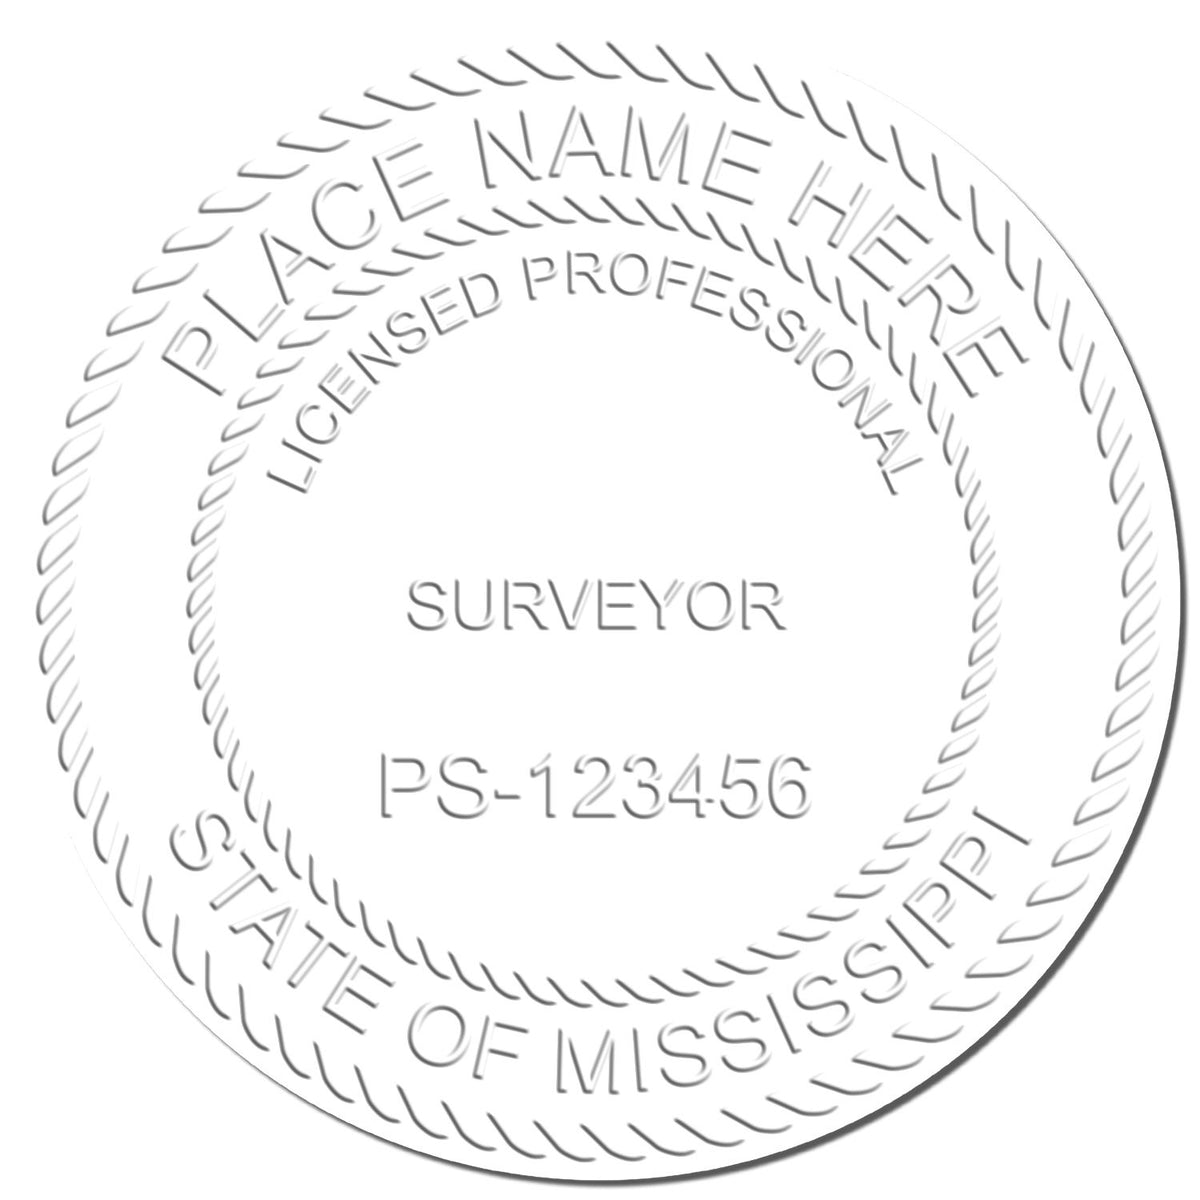 This paper is stamped with a sample imprint of the Hybrid Mississippi Land Surveyor Seal, signifying its quality and reliability.